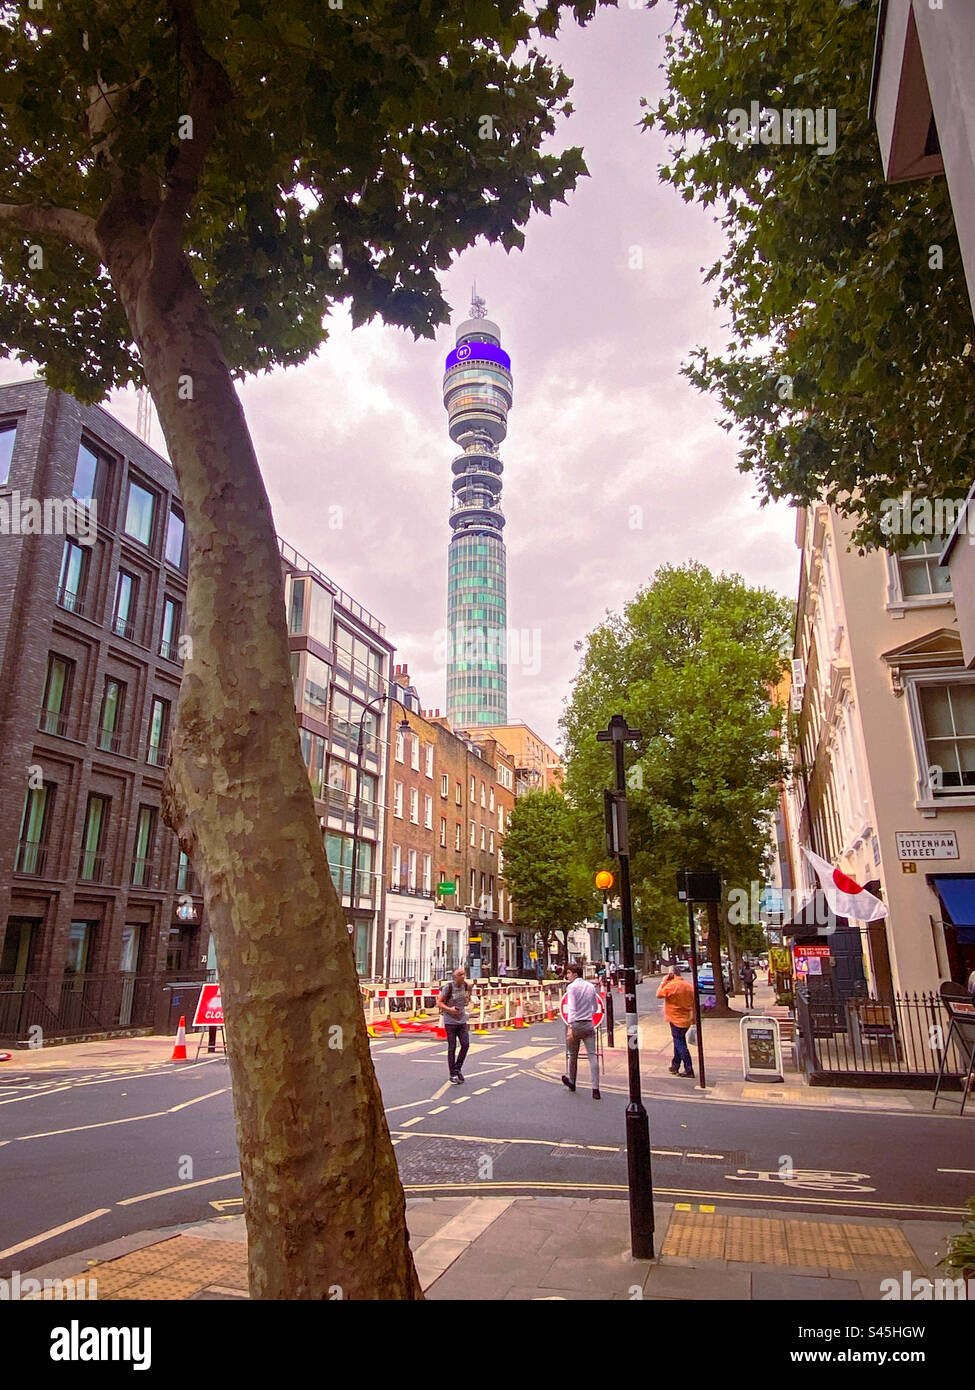 A view if The BT Tower in London, UK Stock Photo